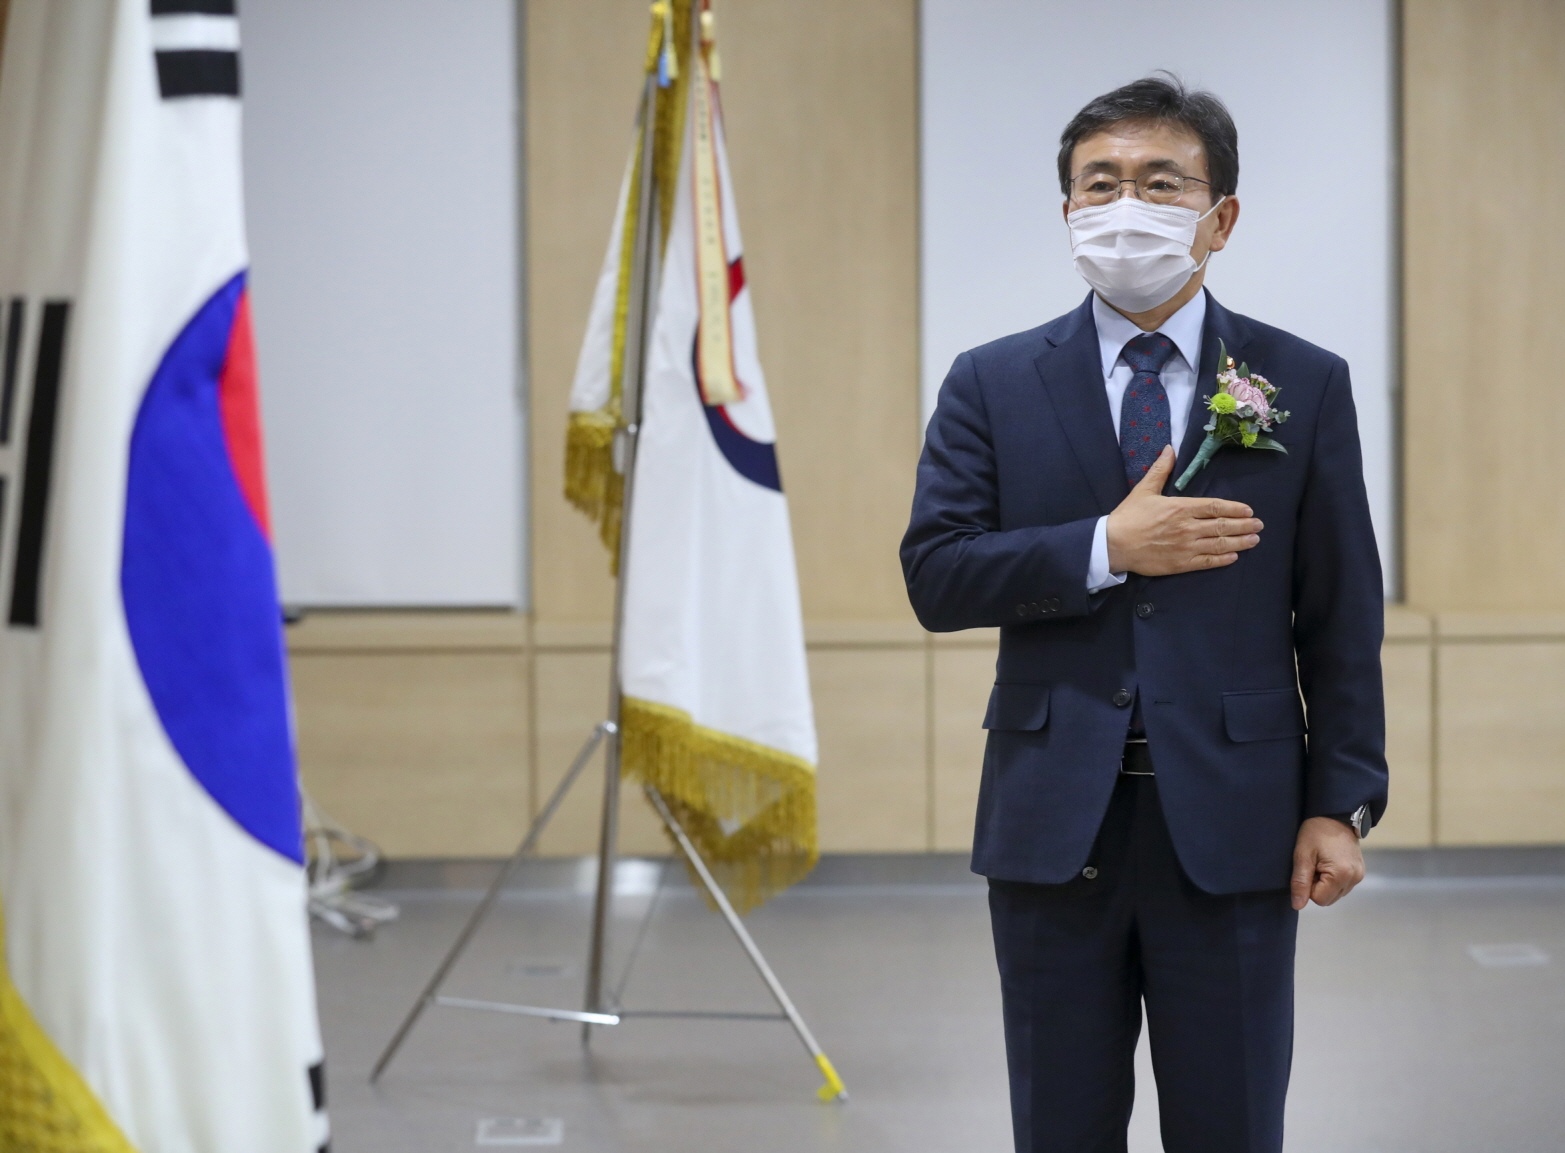 Mr. Kwon Deok-cheol Inaugurated as the 54th Minister of Health and Welfare (December 24) 사진6